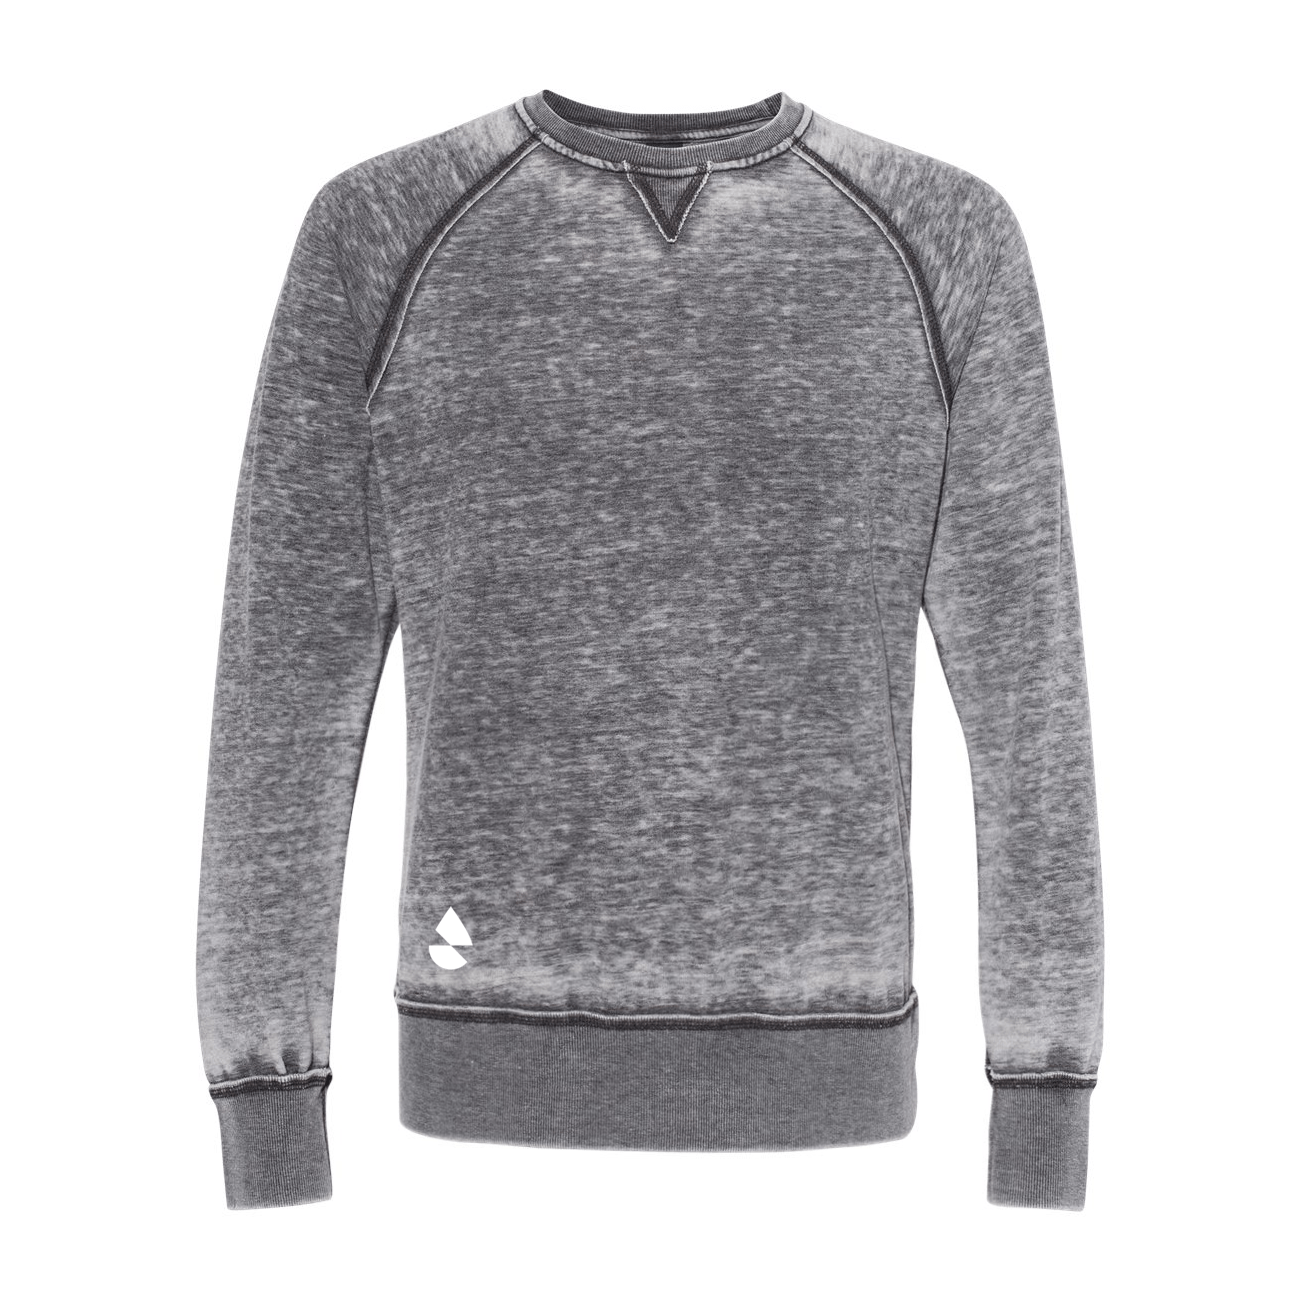 Long-sleeve sweater, a classic company swag go-to